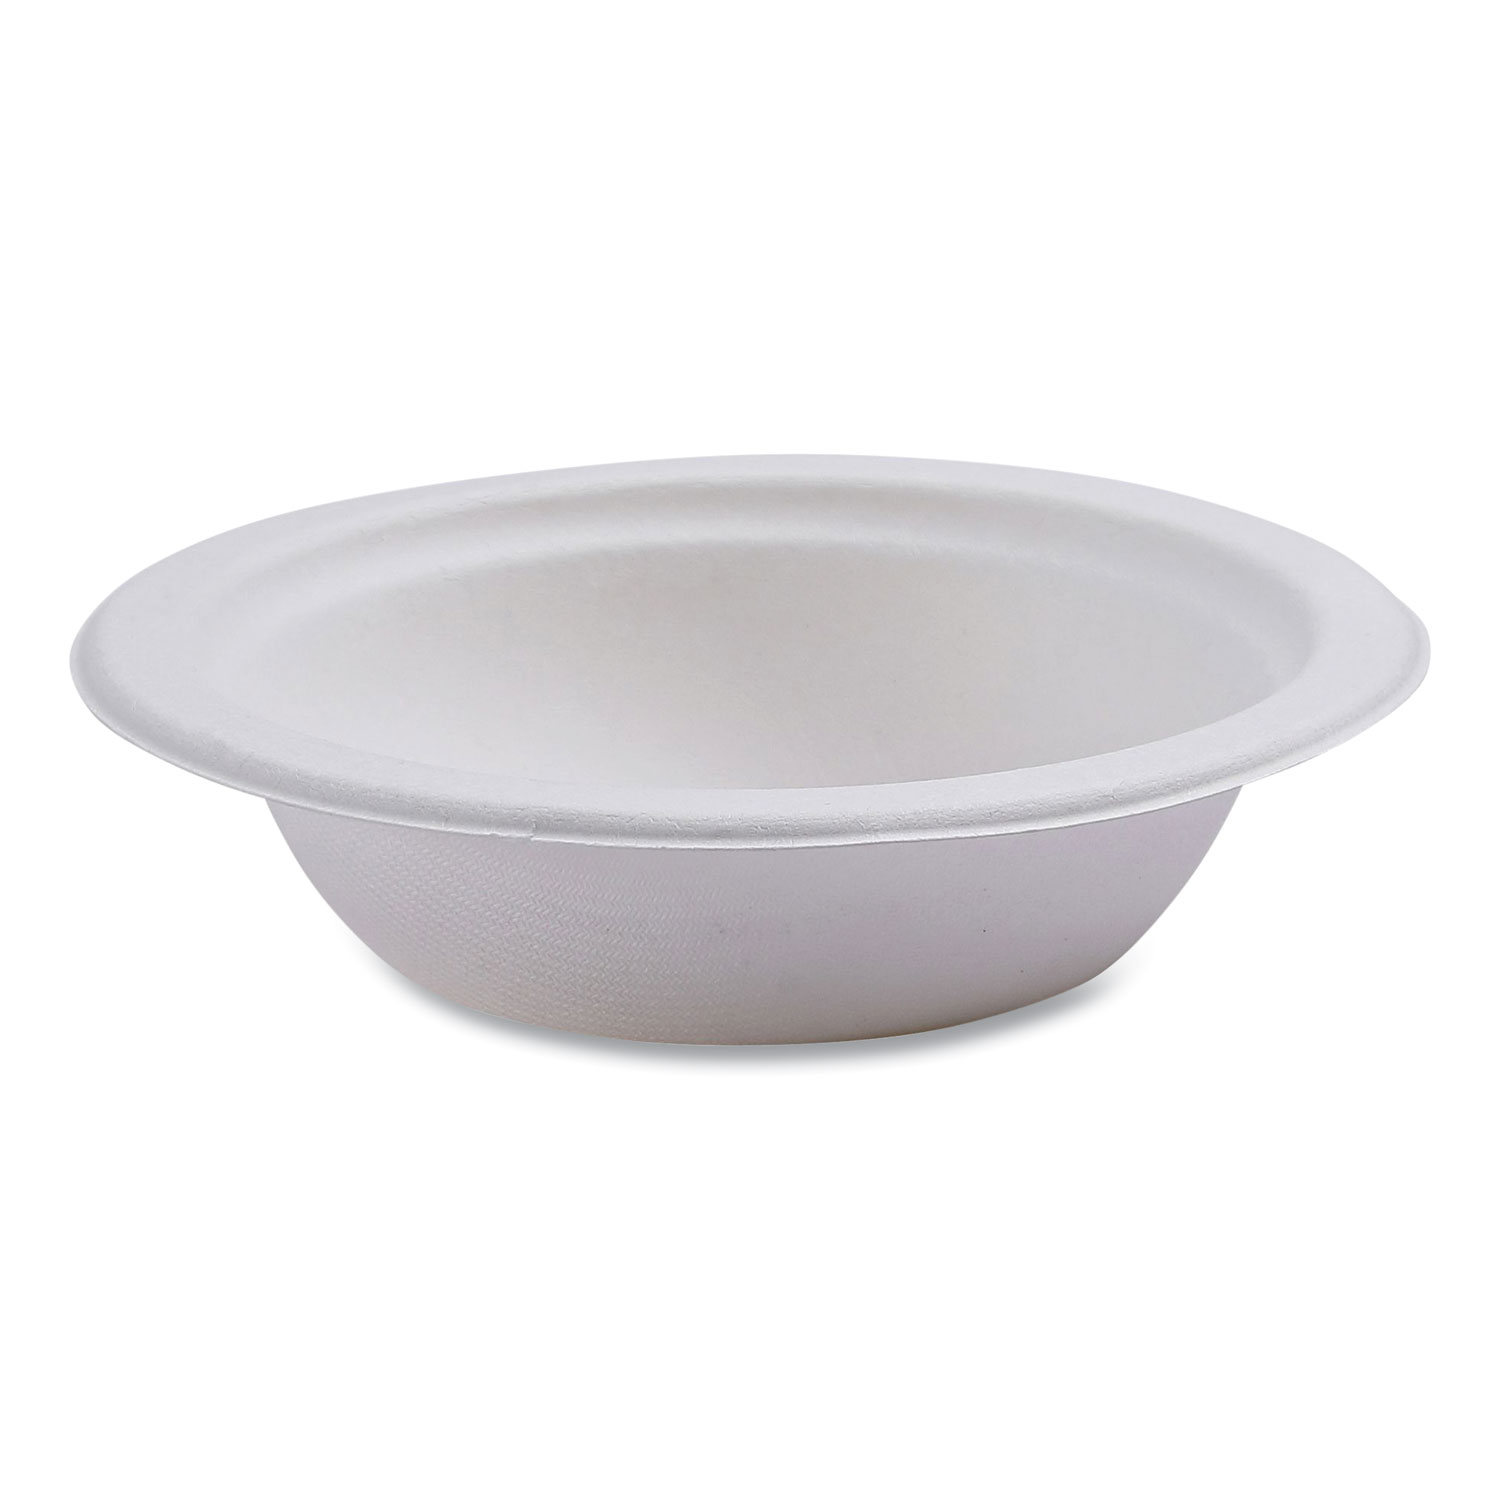 50 Count] 24oz Round Disposable Bowls with Lids Natural Sugarcane